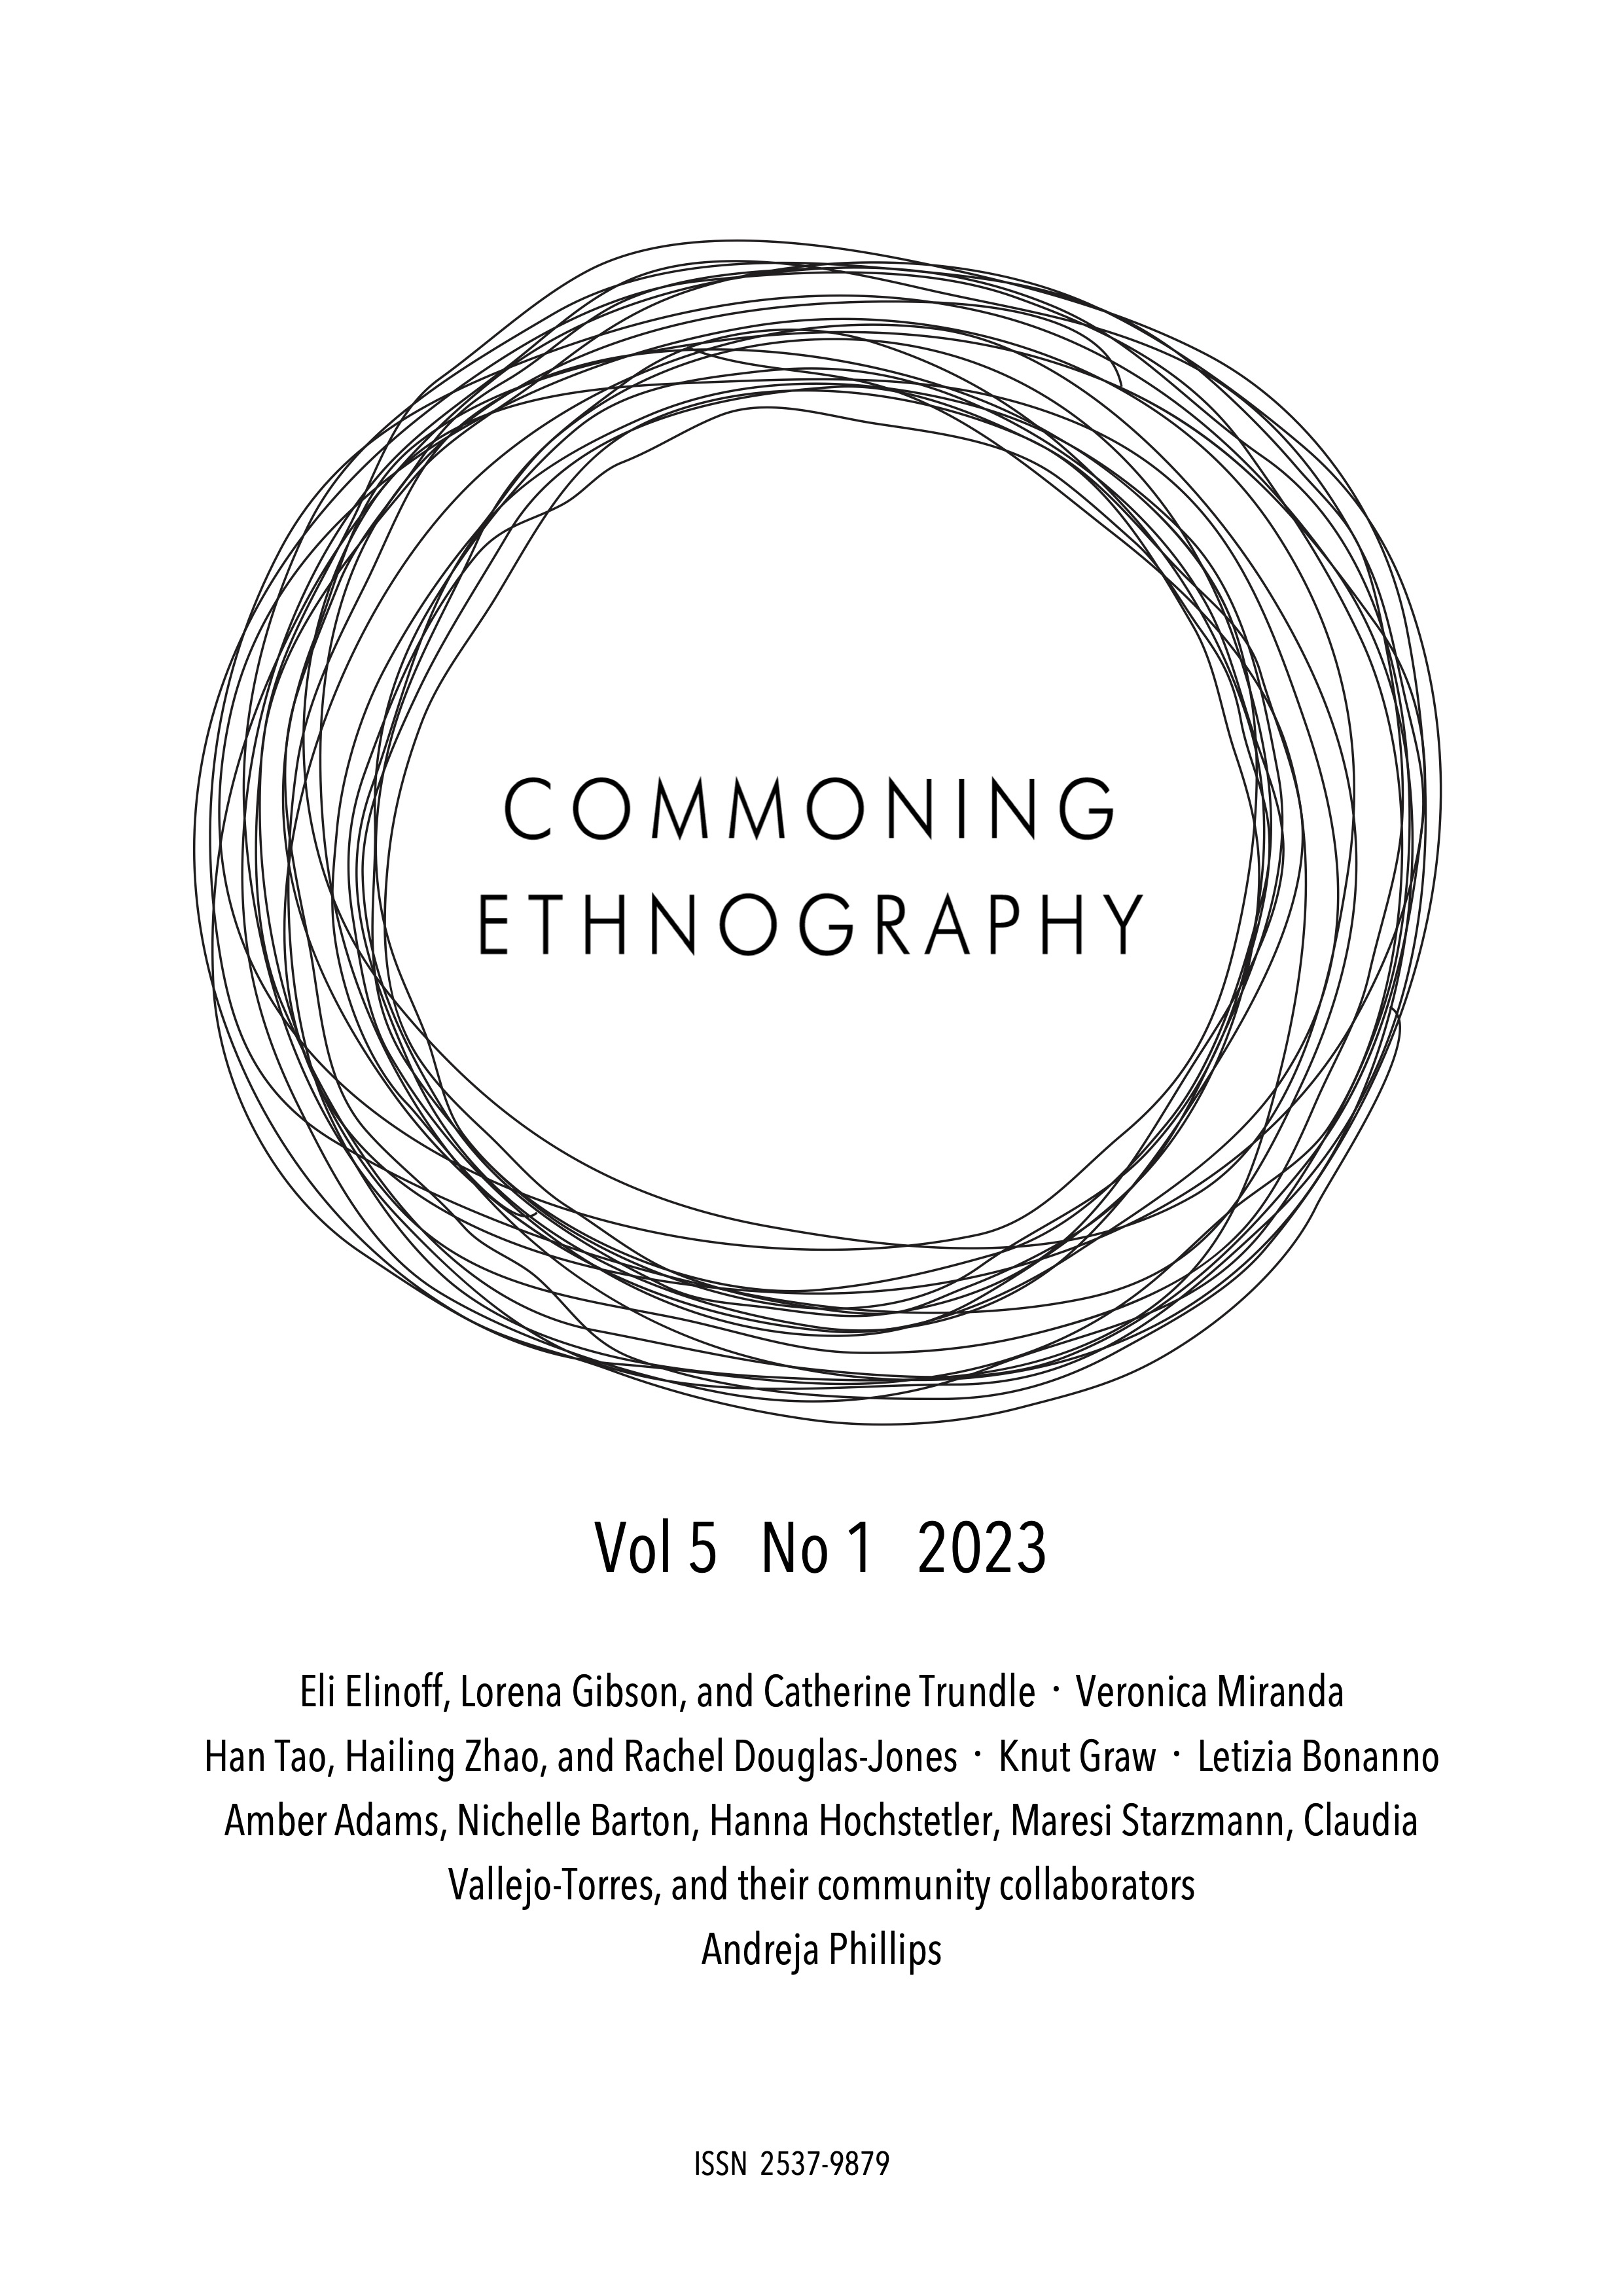 Commoning Ethnography logo with issue date and volume and a list of contributing authors